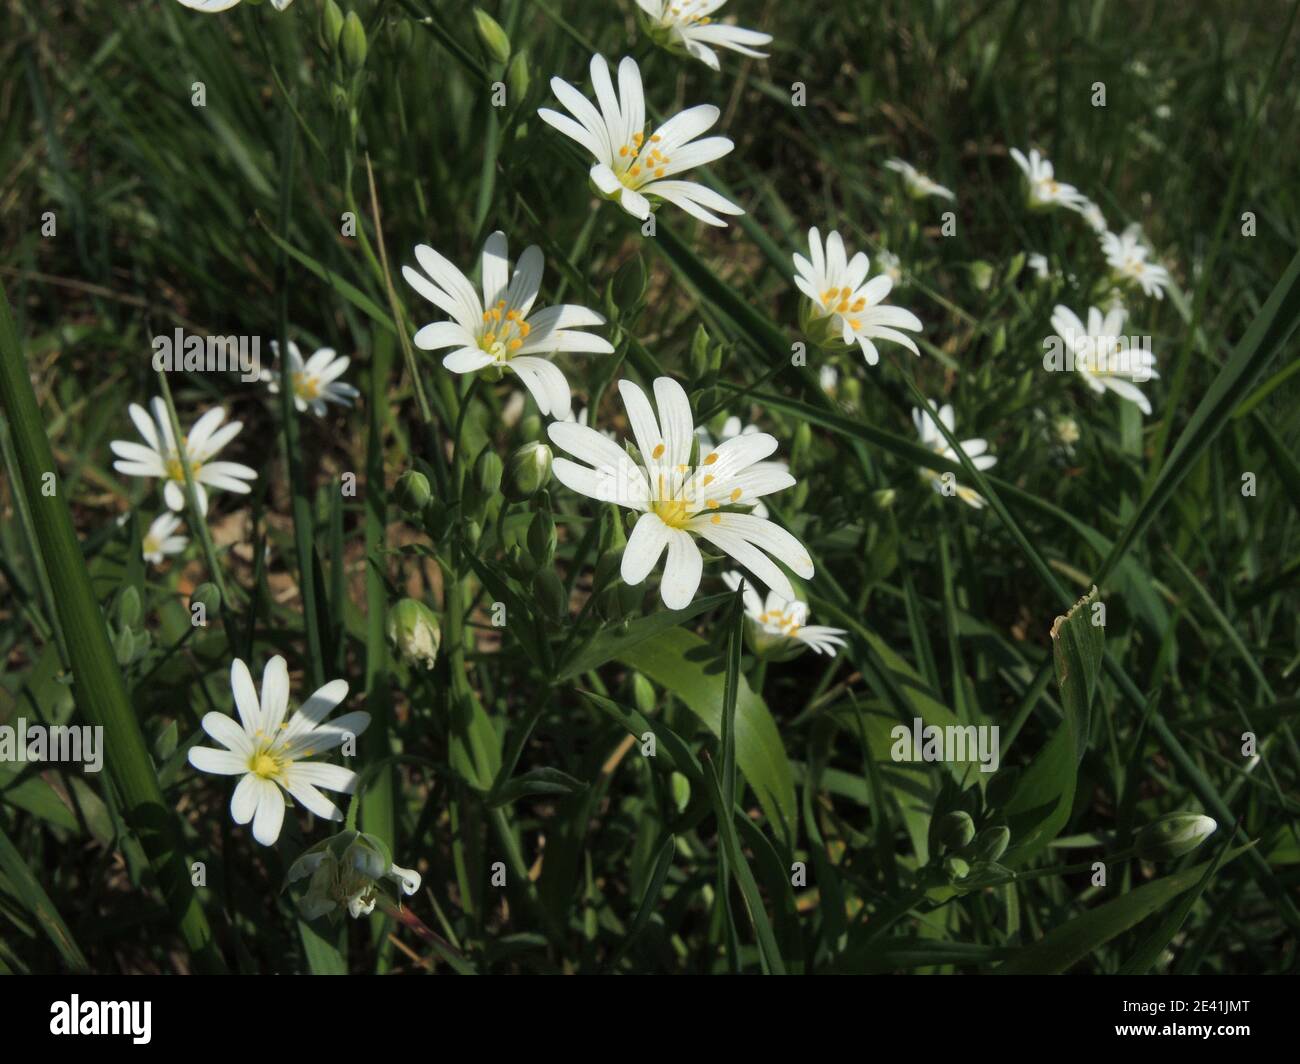 easterbell starwort, greater stitchwort (Stellaria holostea), blooming, Germany Stock Photo